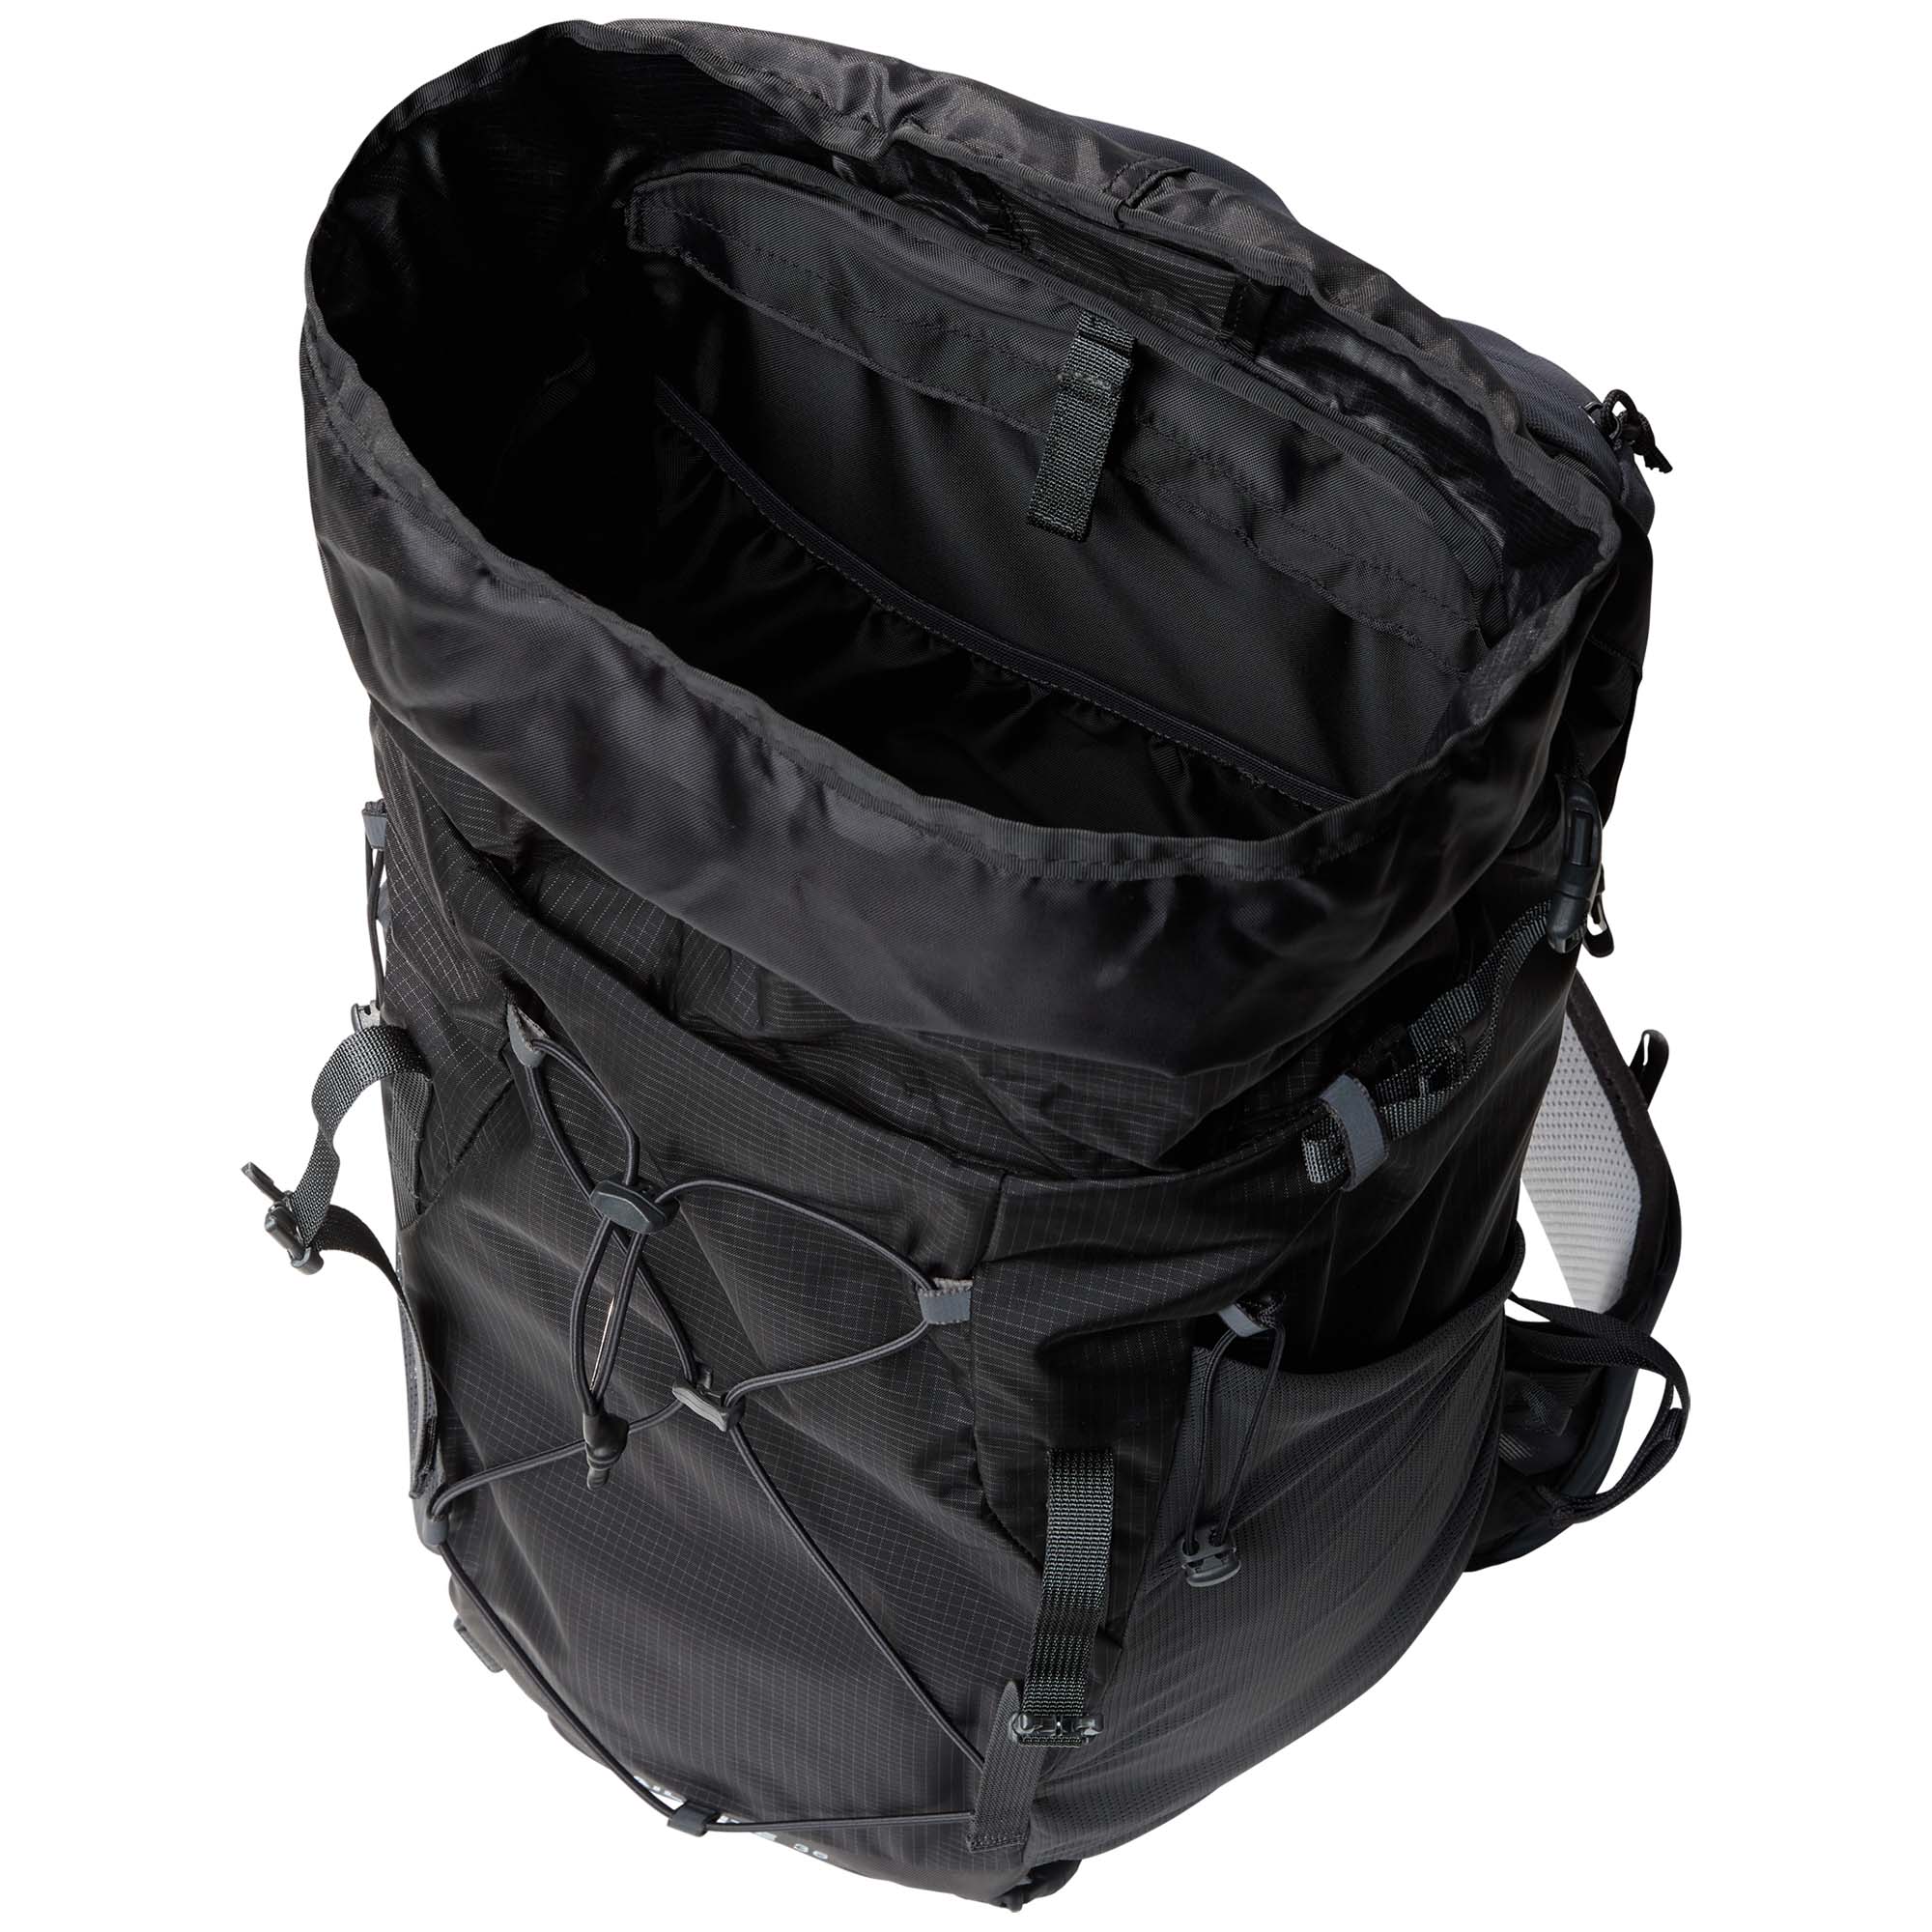 The North Face Trail Lite 36 Hiking Backpack/Day Pack